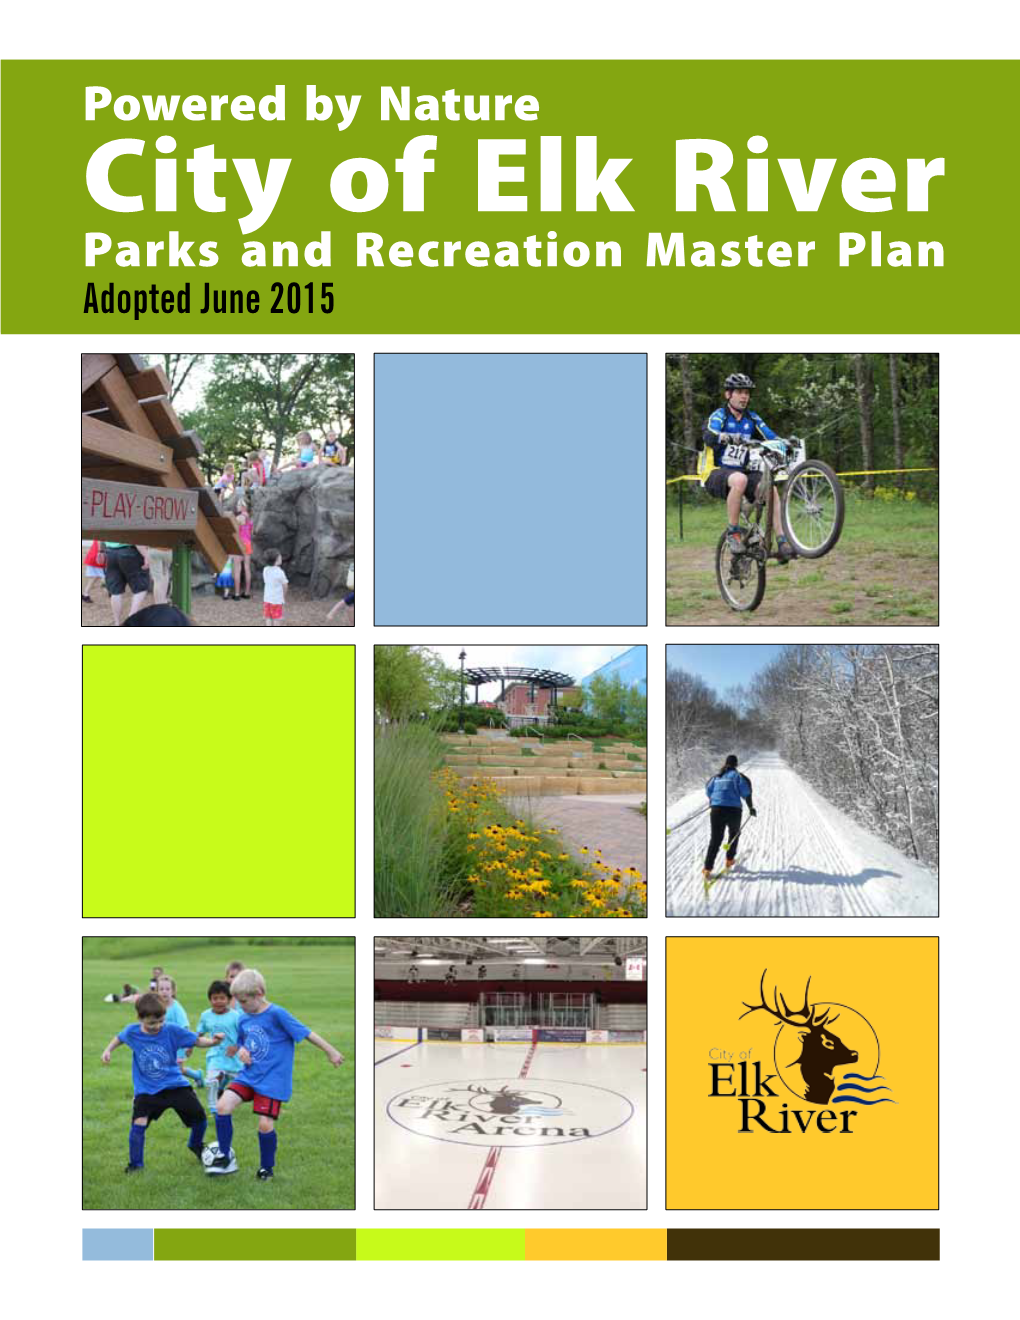 Elk River Parks and Recreation Master Plan Adopted June 2015 Powered by Nature City of Elk River Parks and Recreation Master Plan